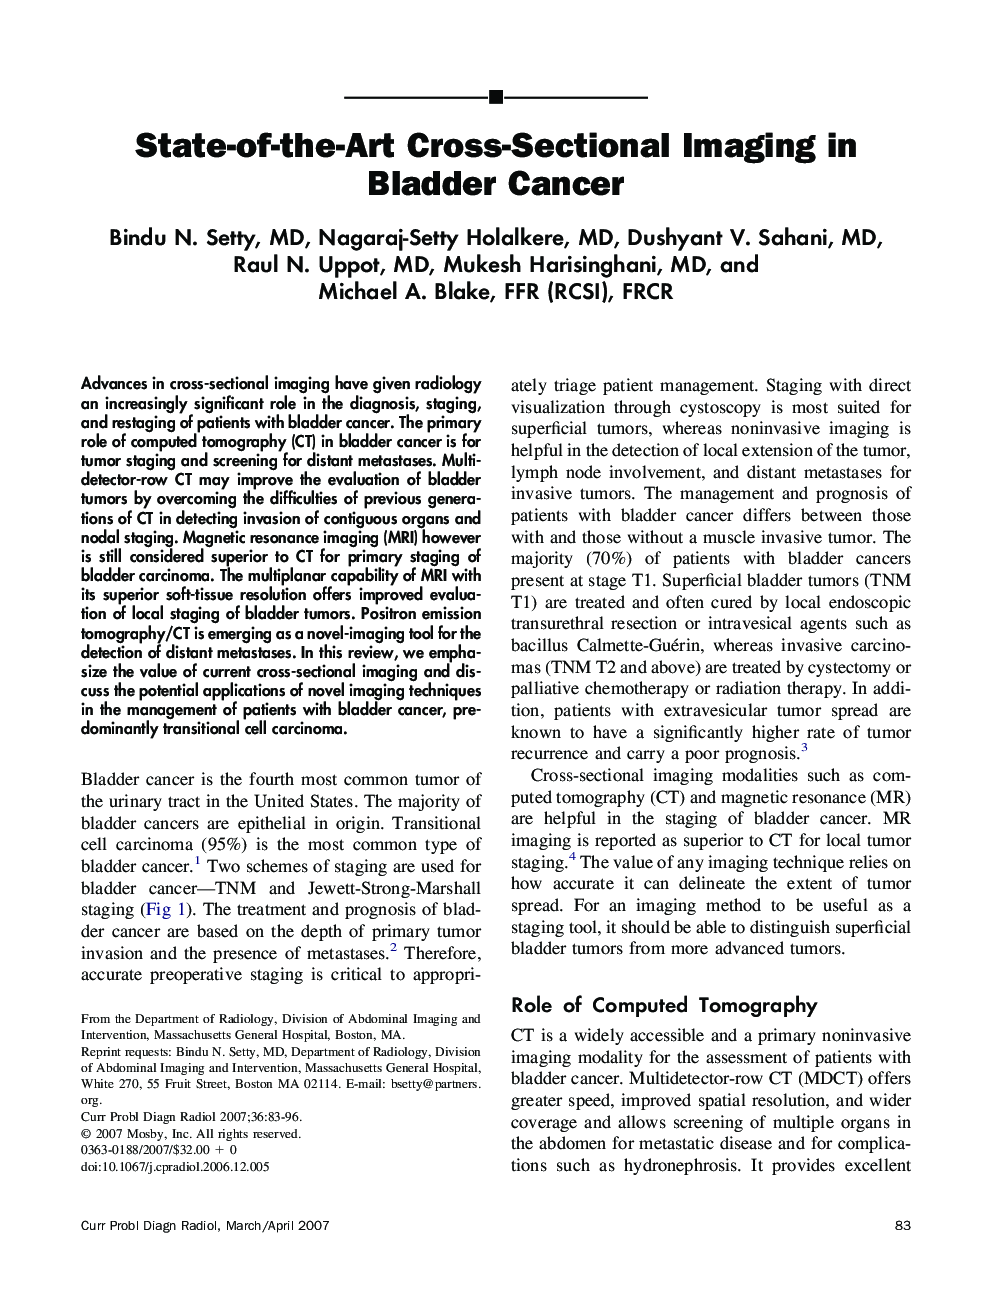 State-of-the-Art Cross-Sectional Imaging in Bladder Cancer